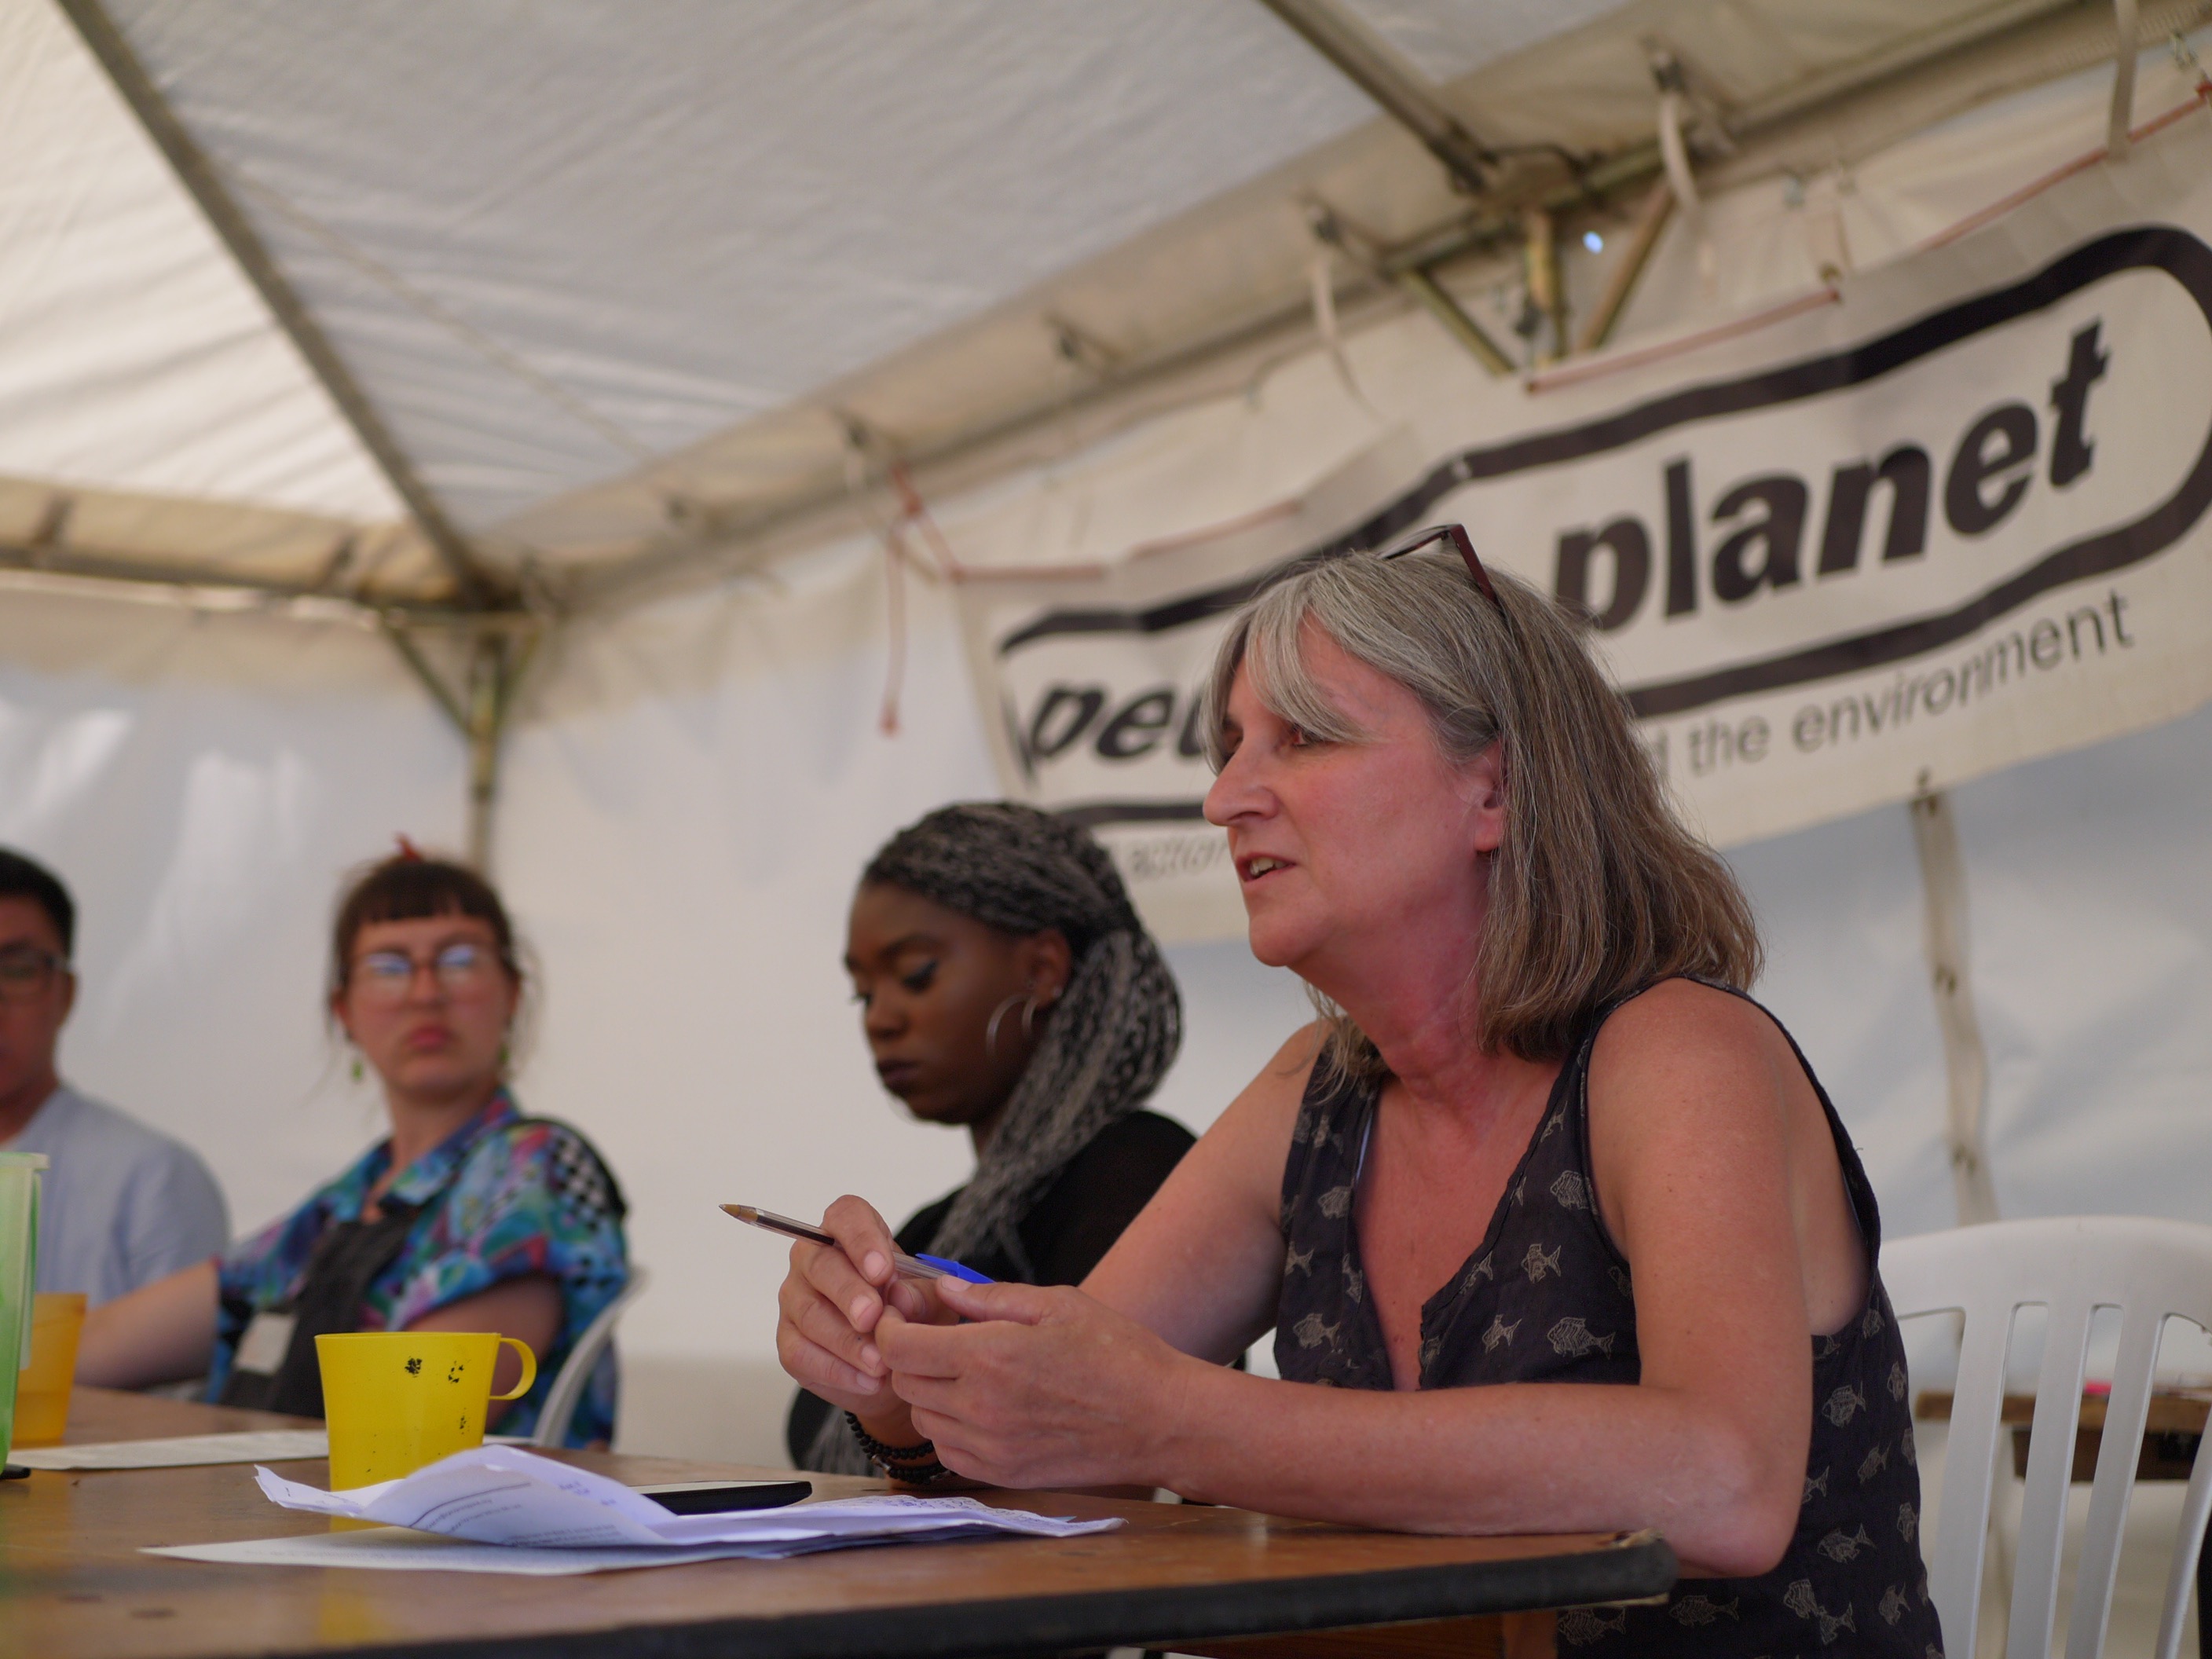 A panel of speakers sits in front of a People & Planet banner.